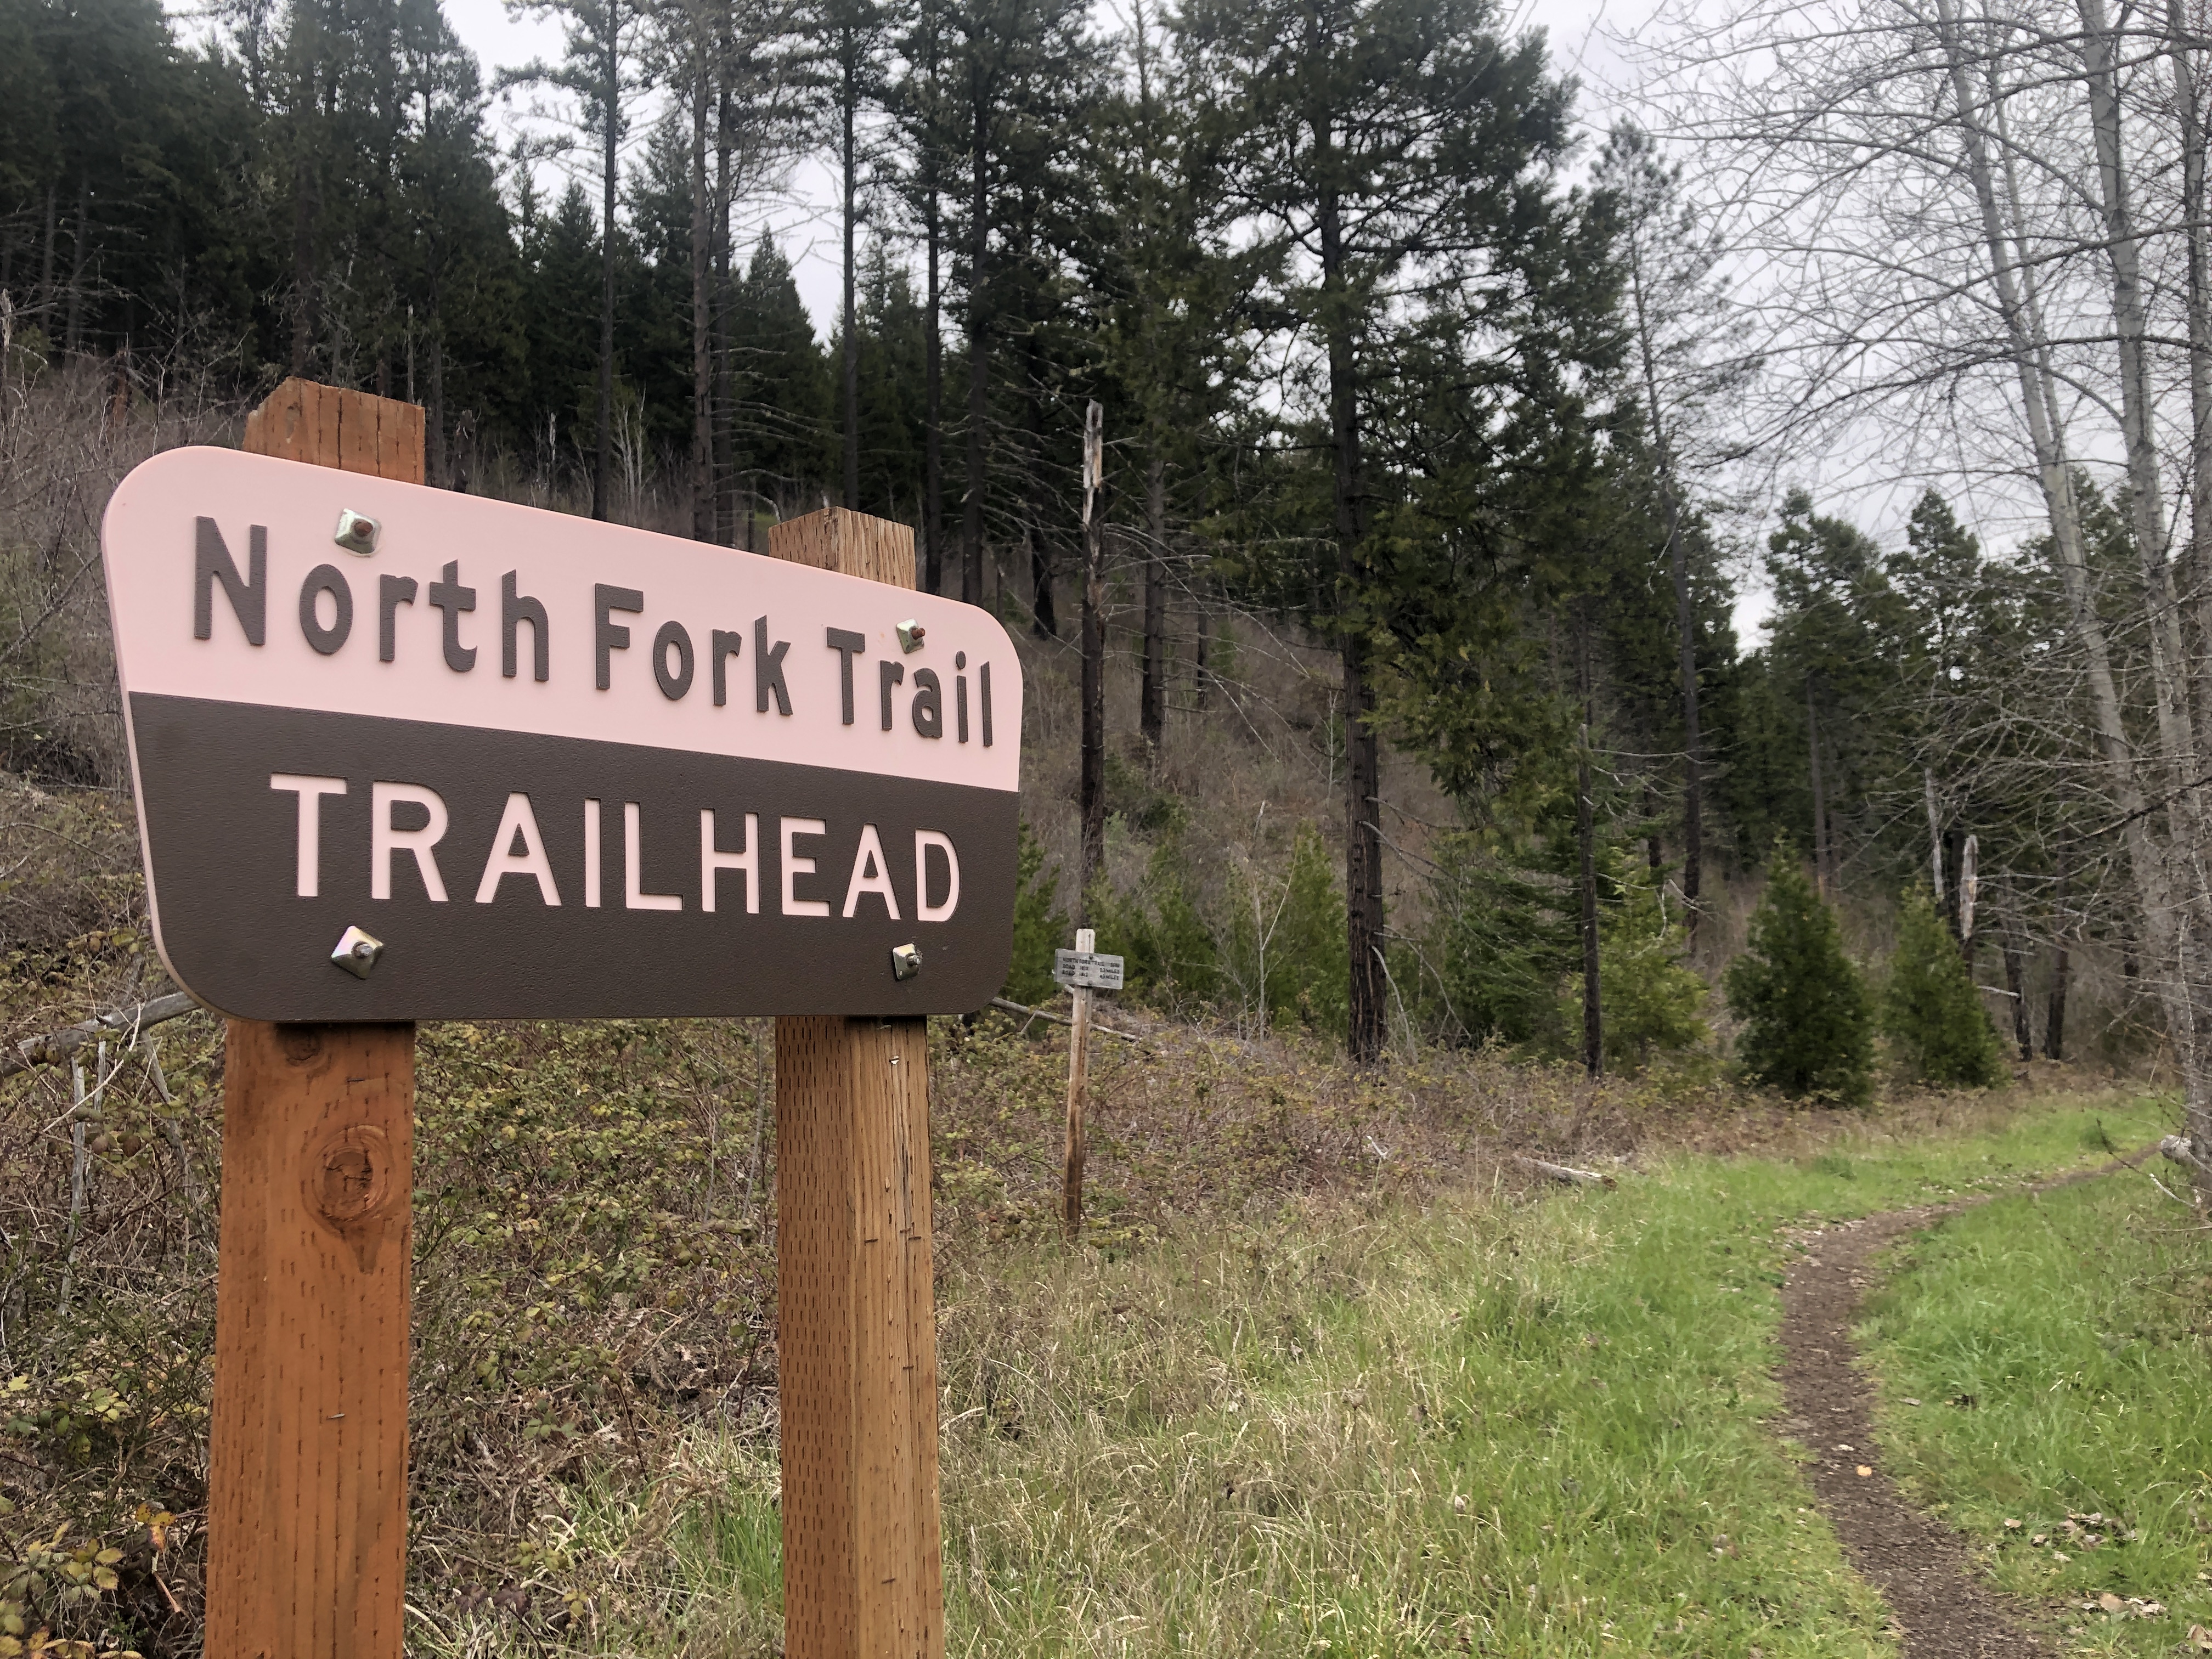 A sign indicating "North Fork Trail"